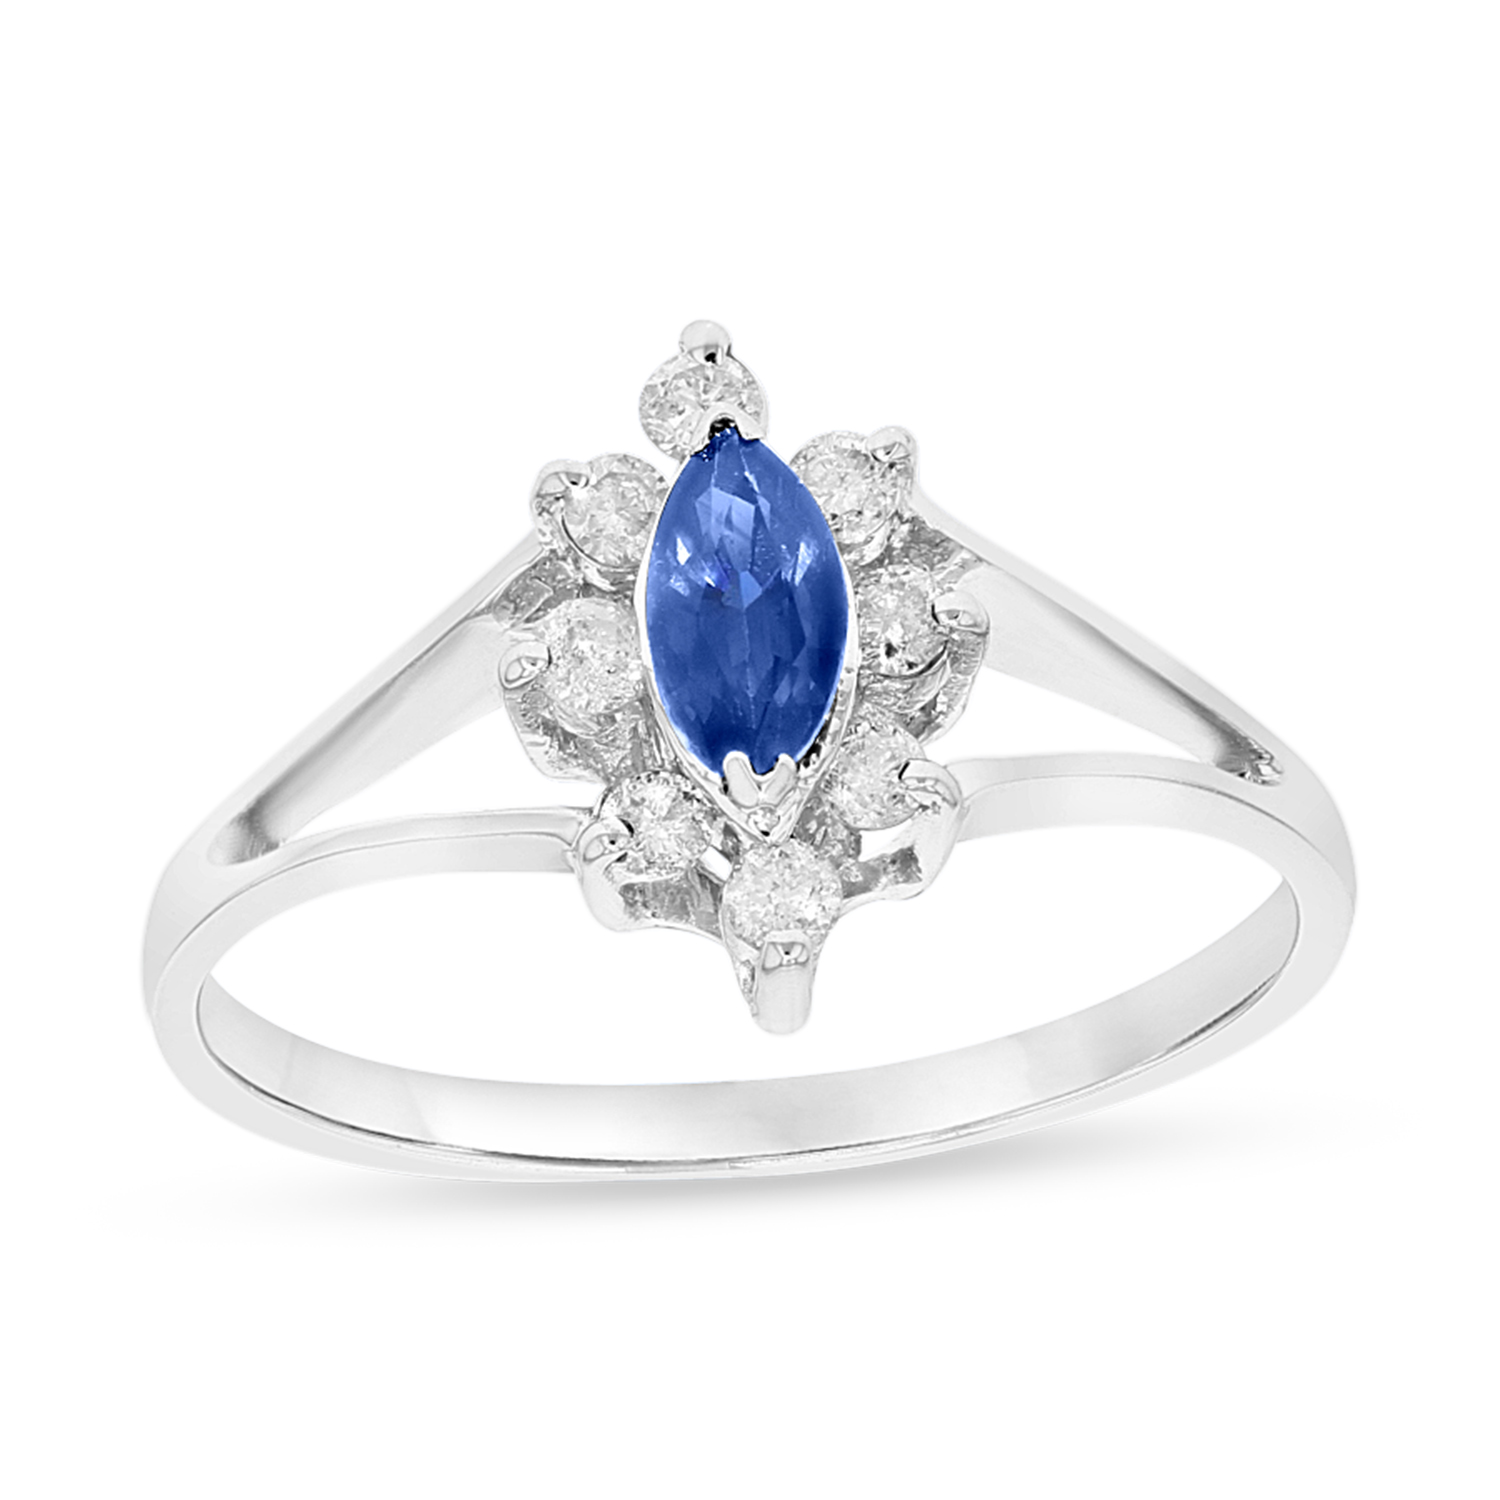 0.40ctw Diamond and Sapphire Marquis Ring in 14k White Gold